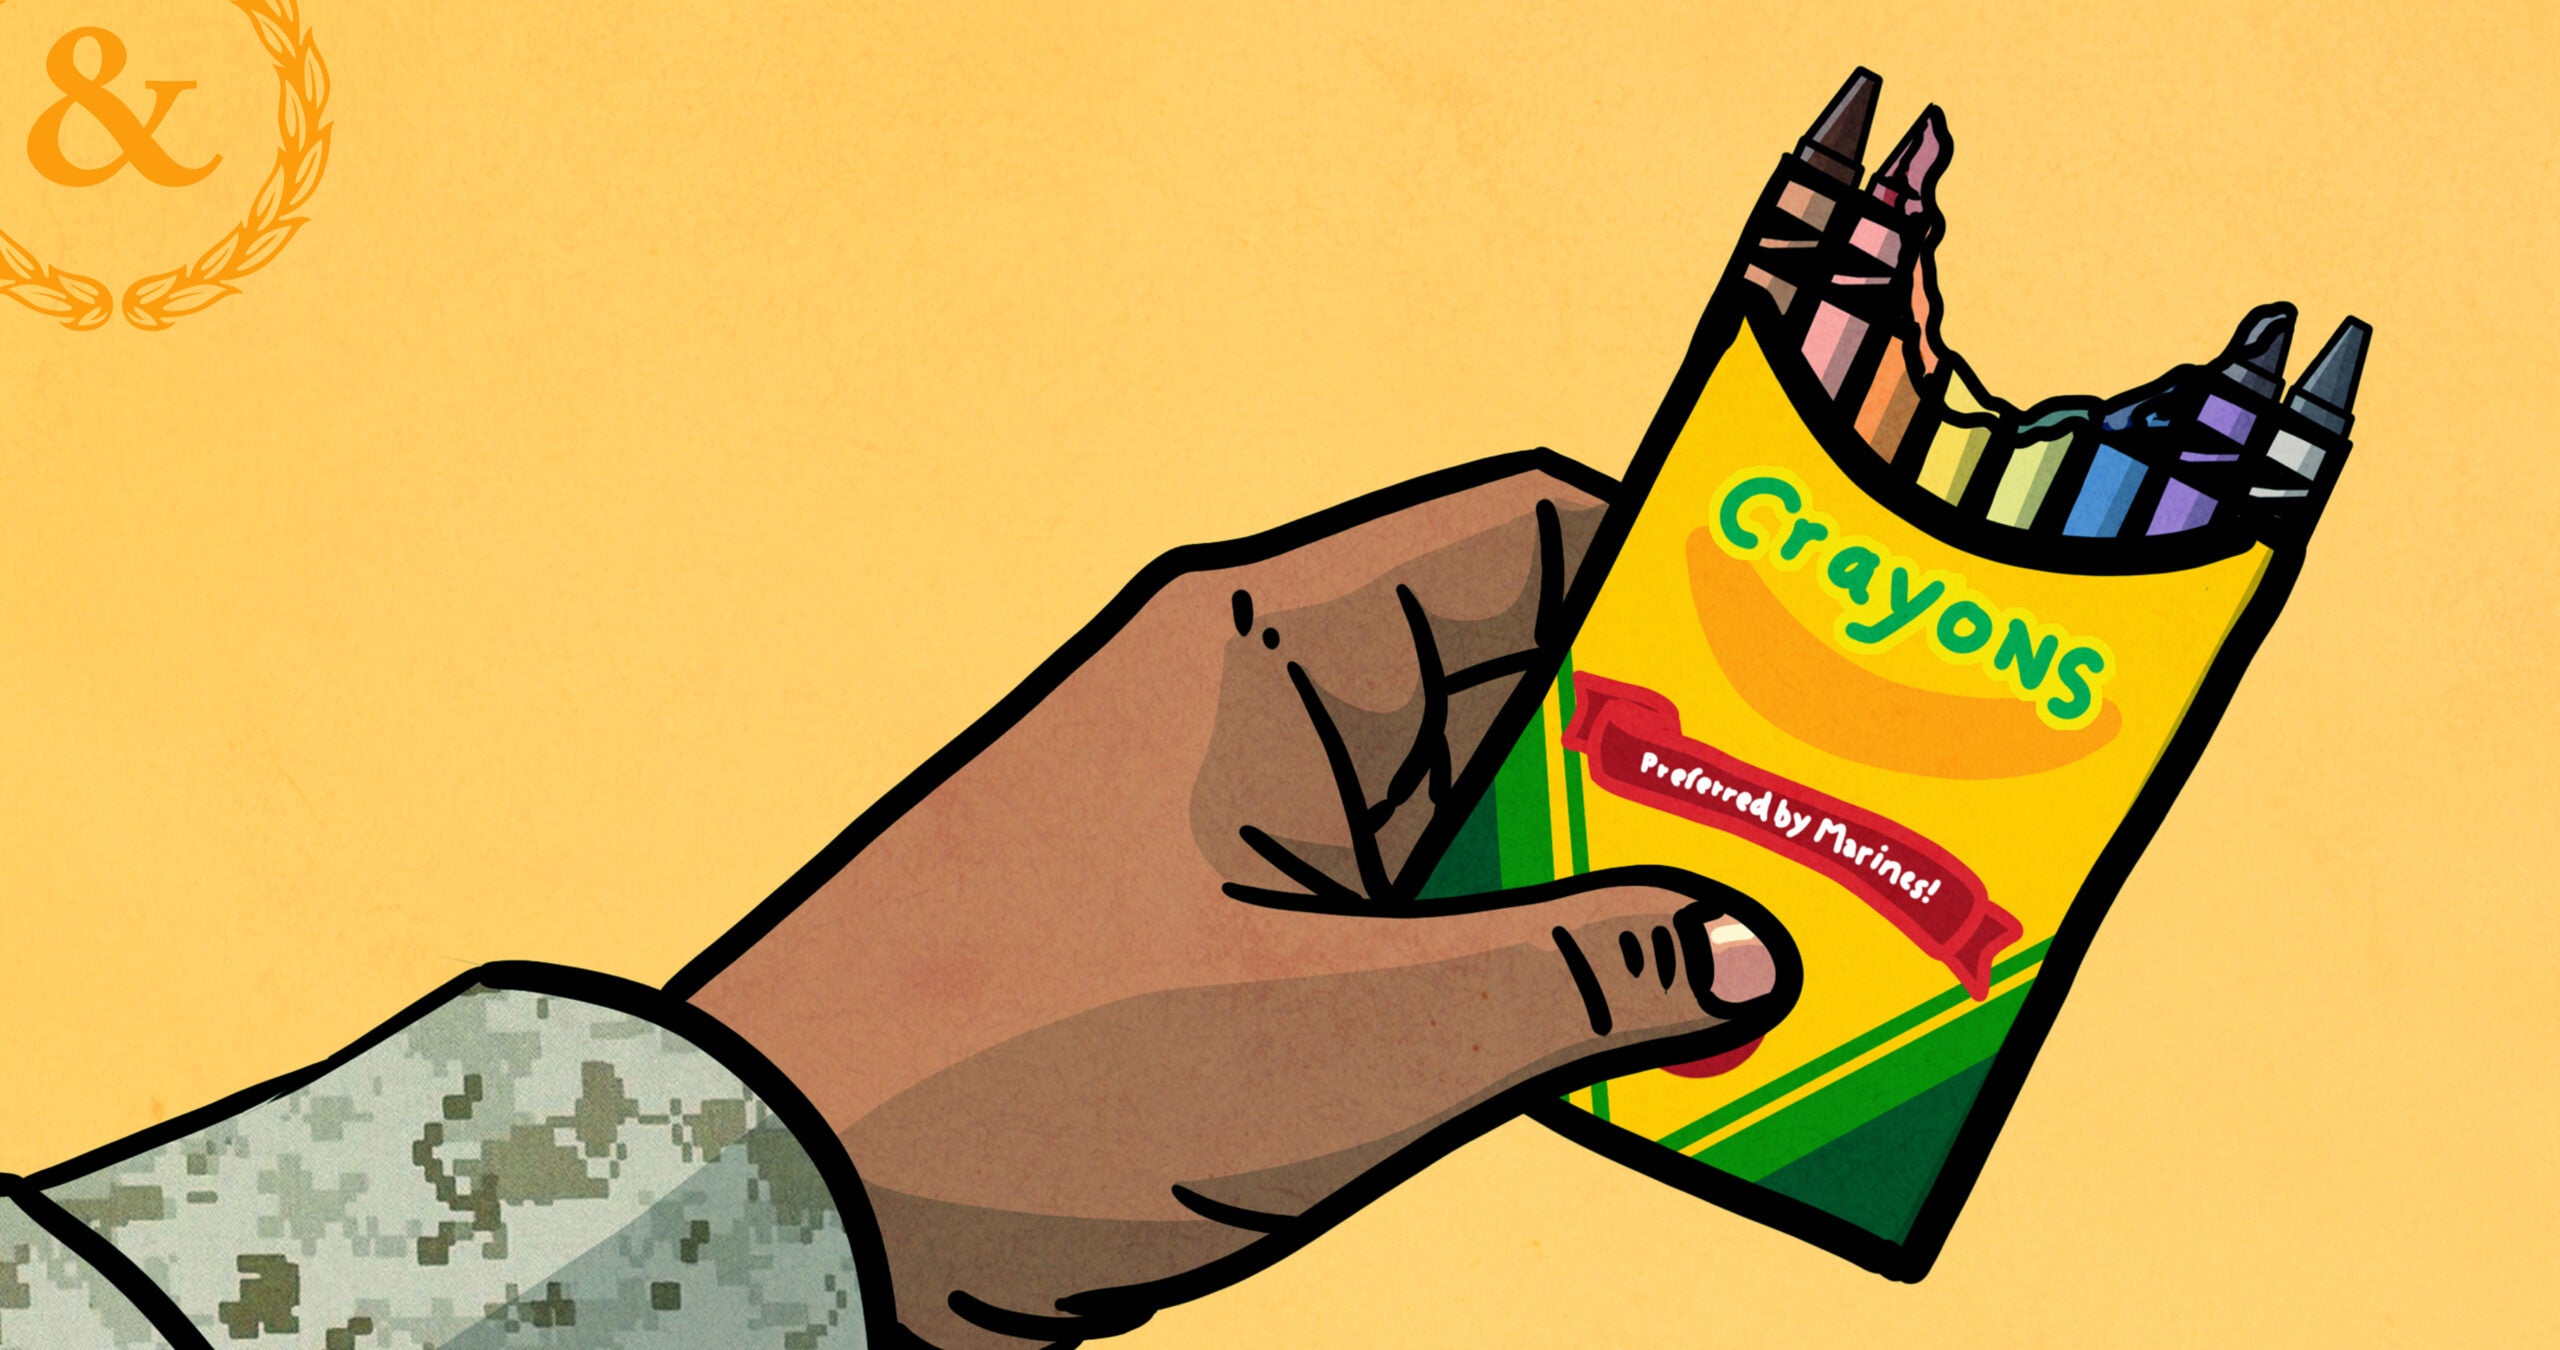 Why do Marines like to eat crayons? - Quora